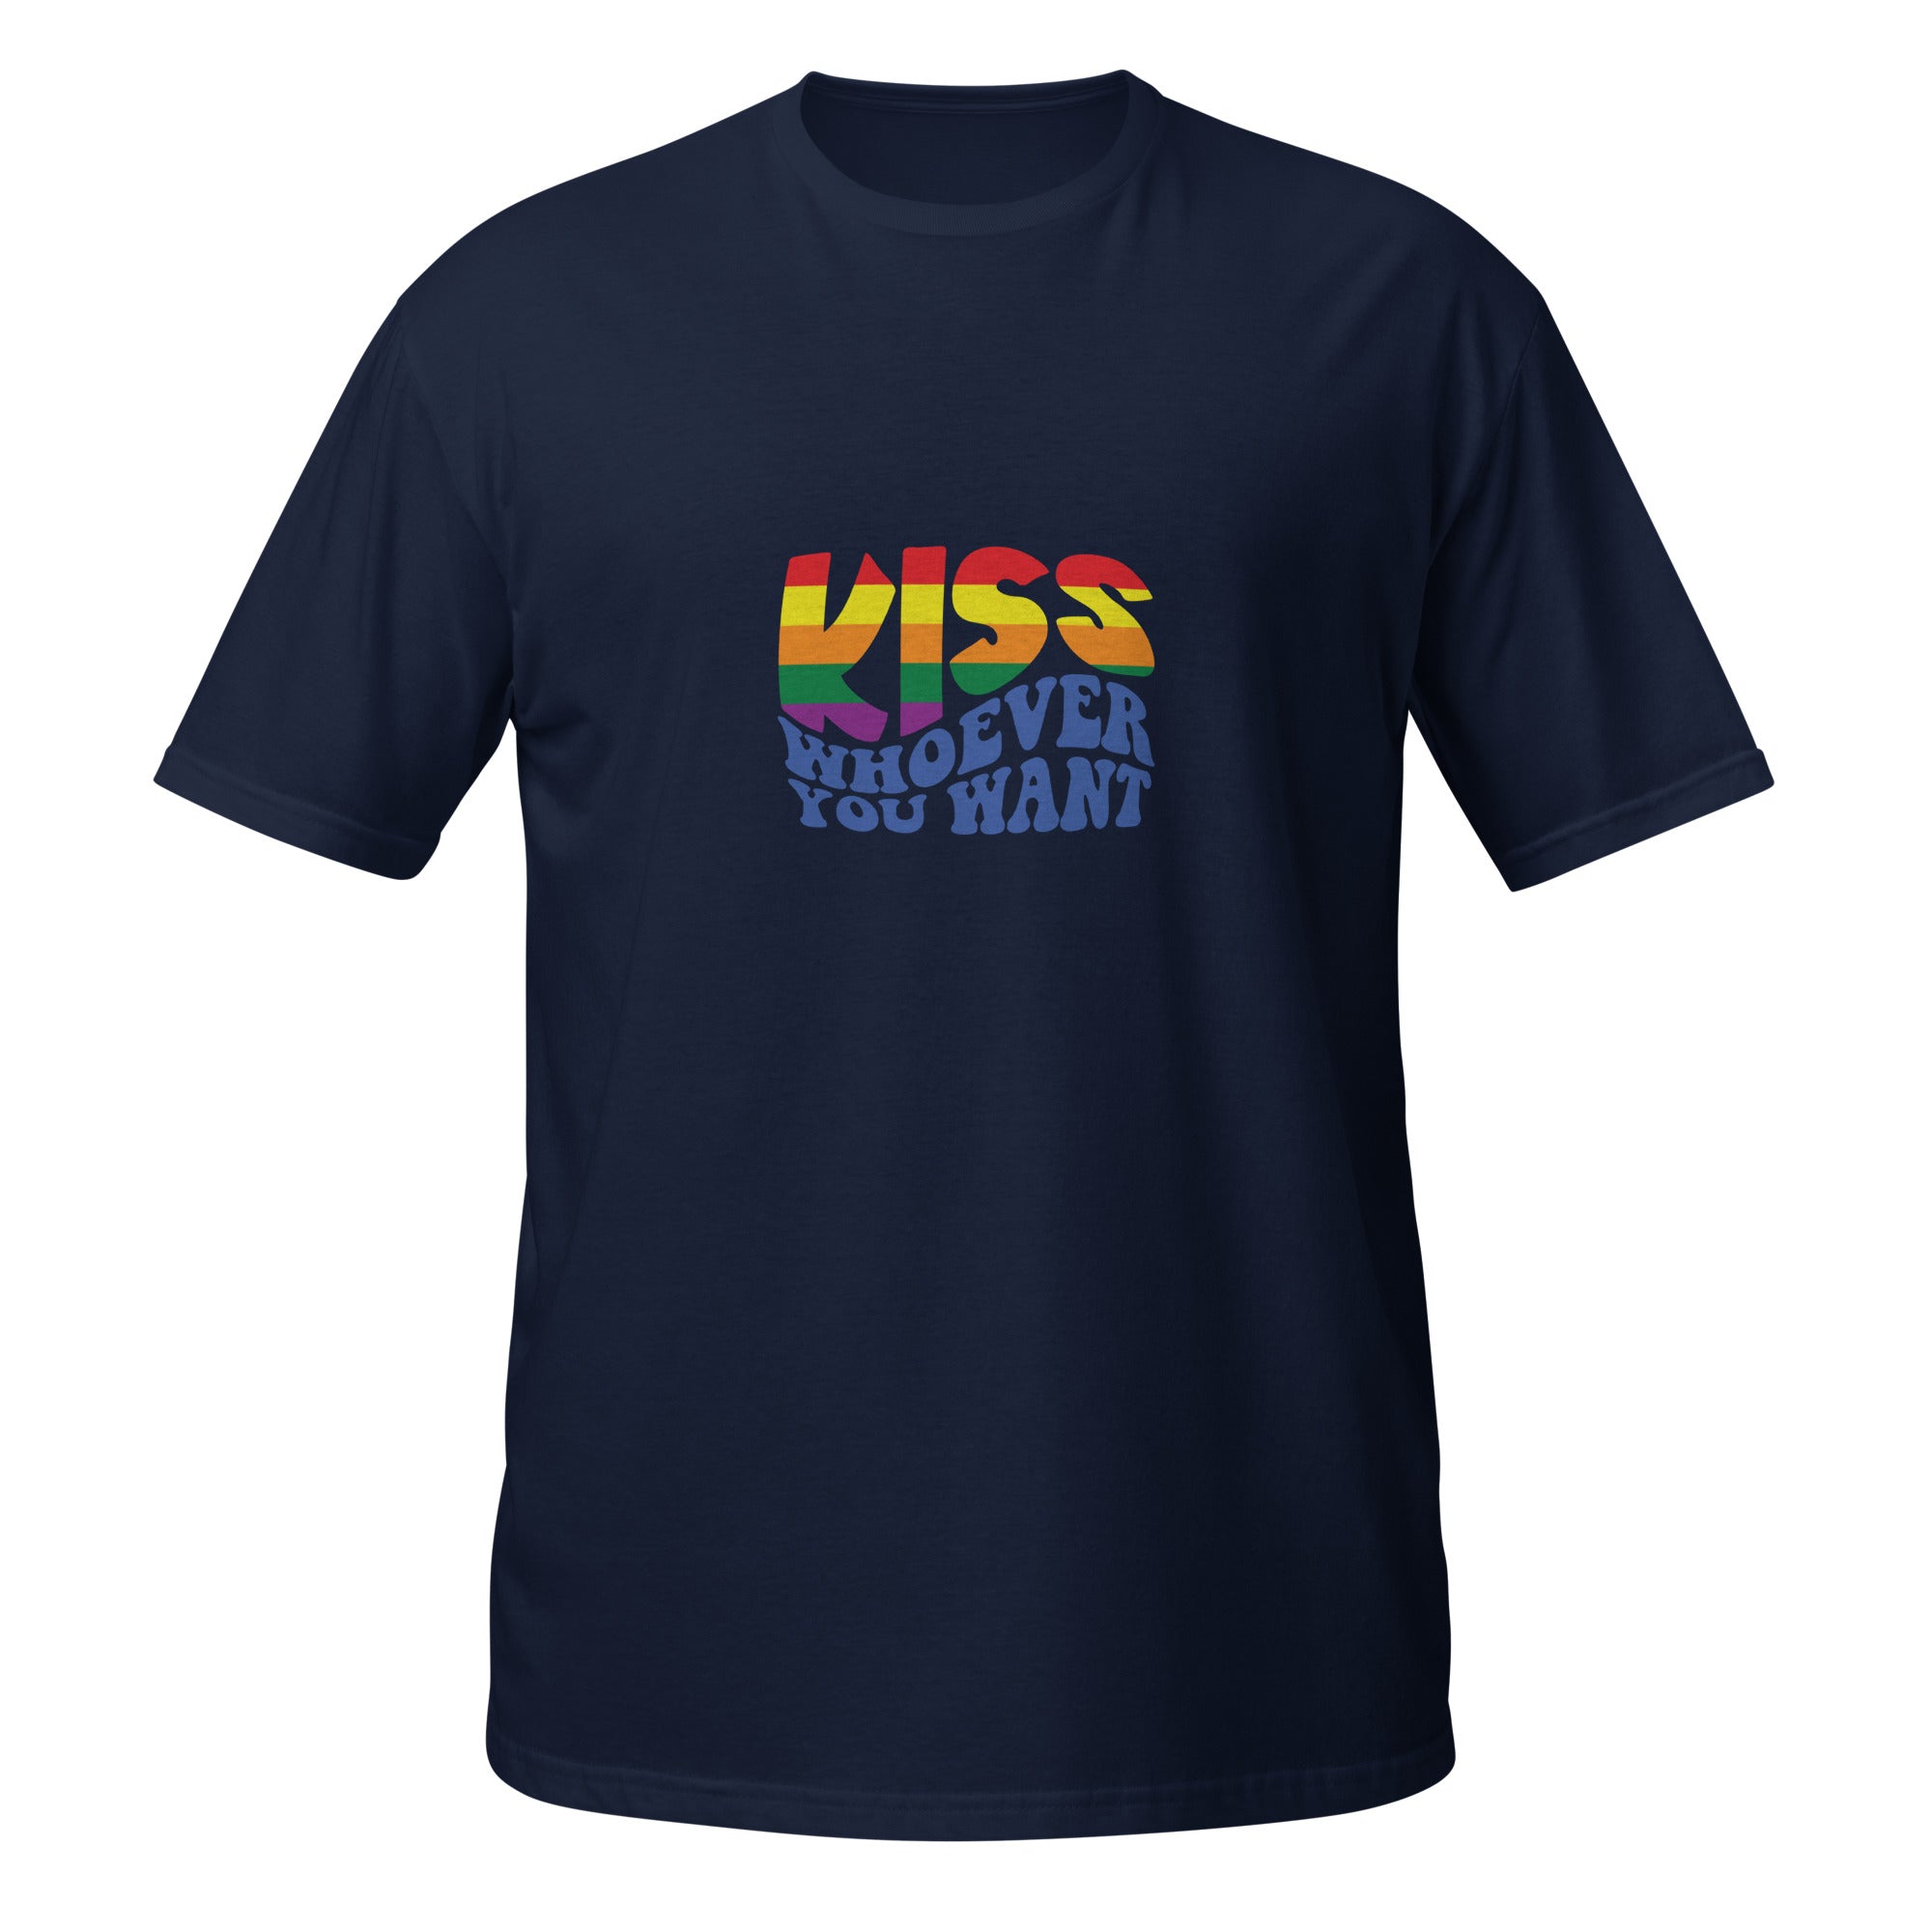 Short-Sleeve Unisex T-Shirt- Kiss whoever you want